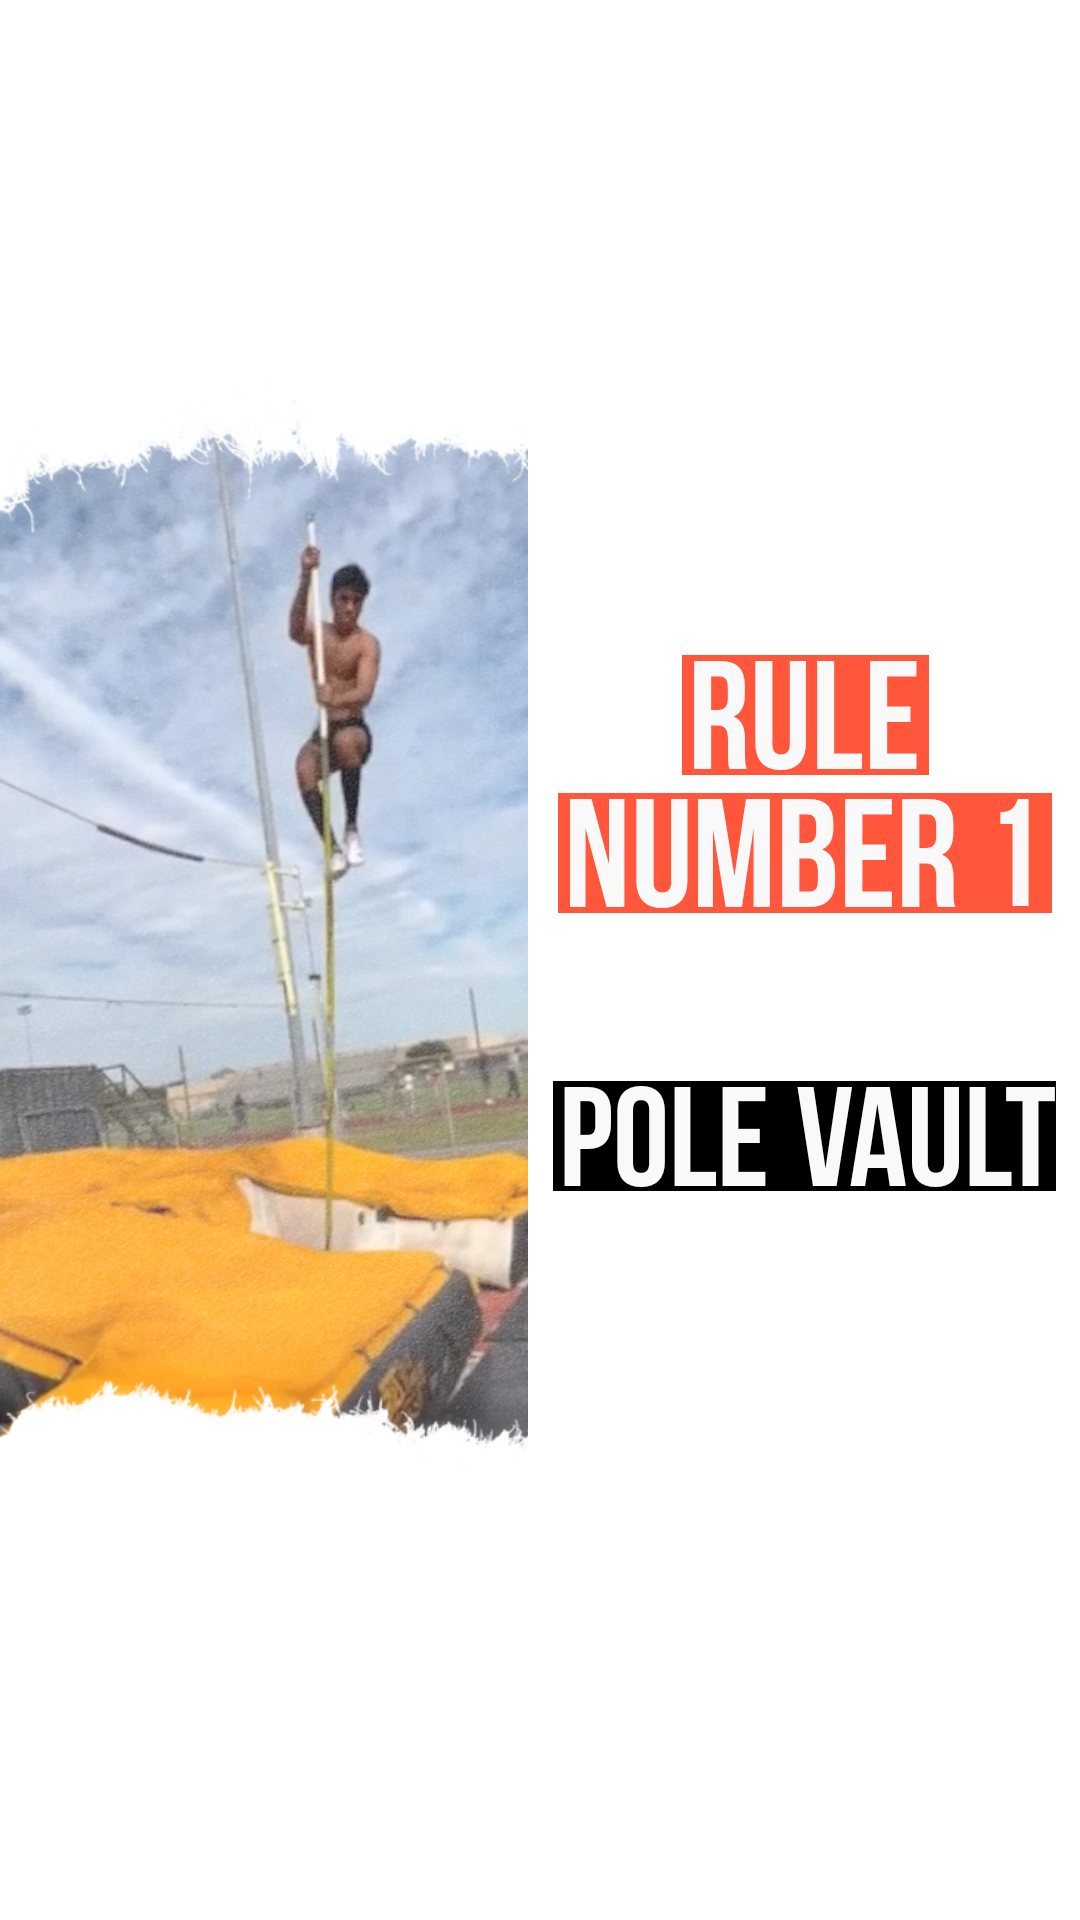 Rule Number 1 In the Pole Vault